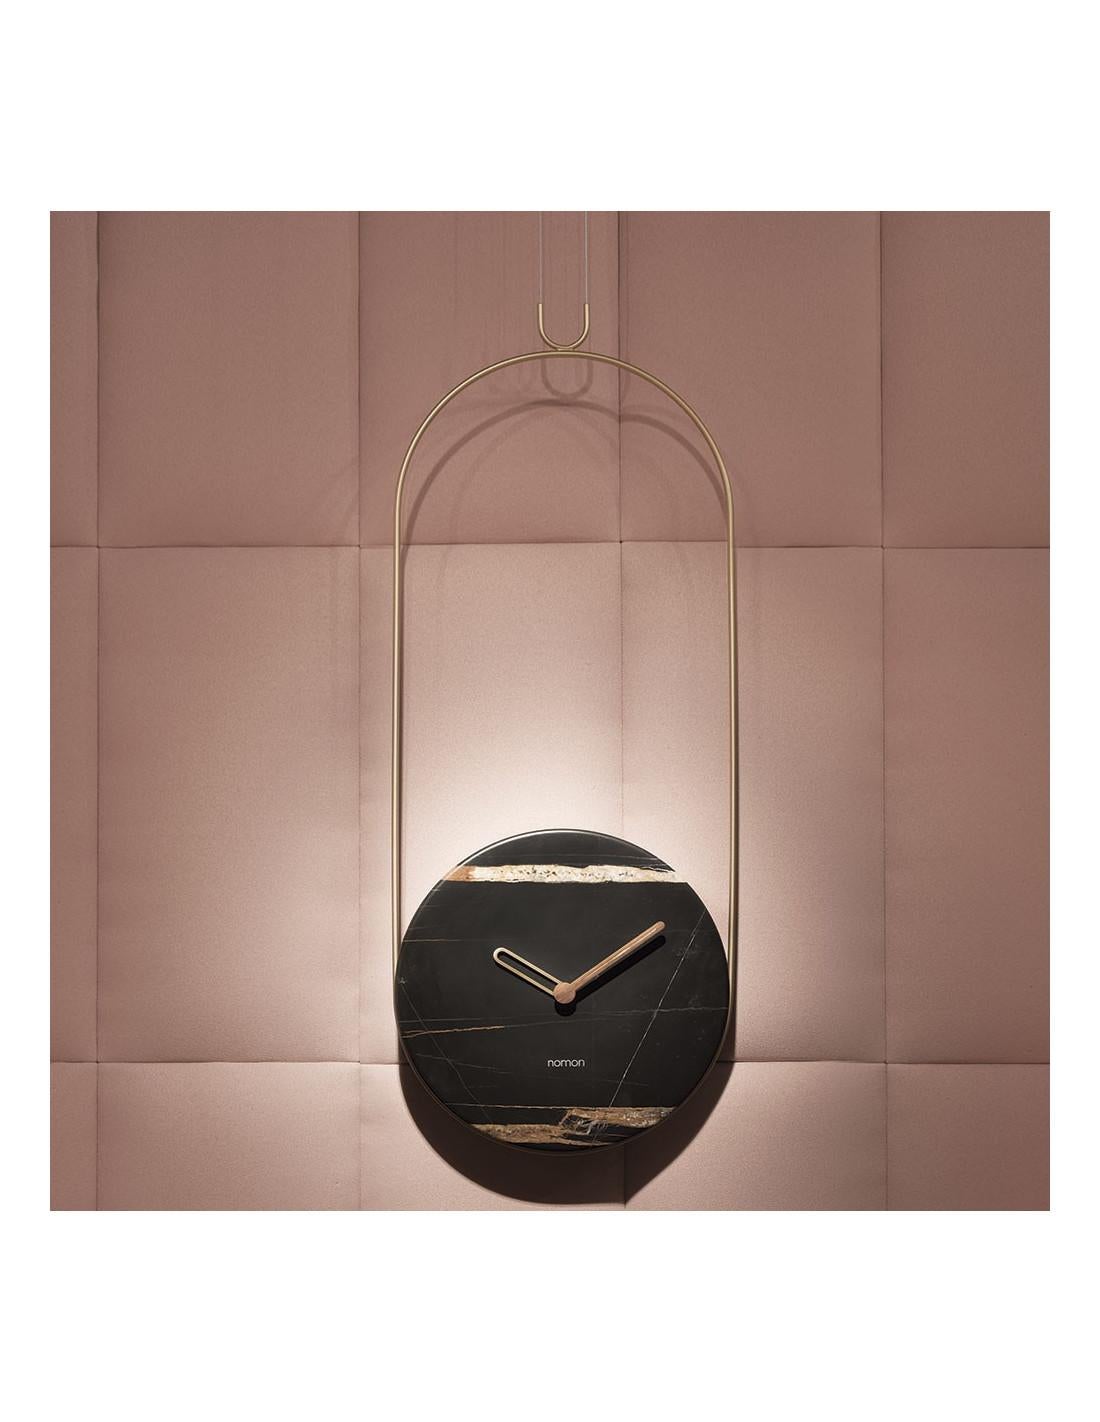 Contemporary Colgante Marble Wall Clock For Sale